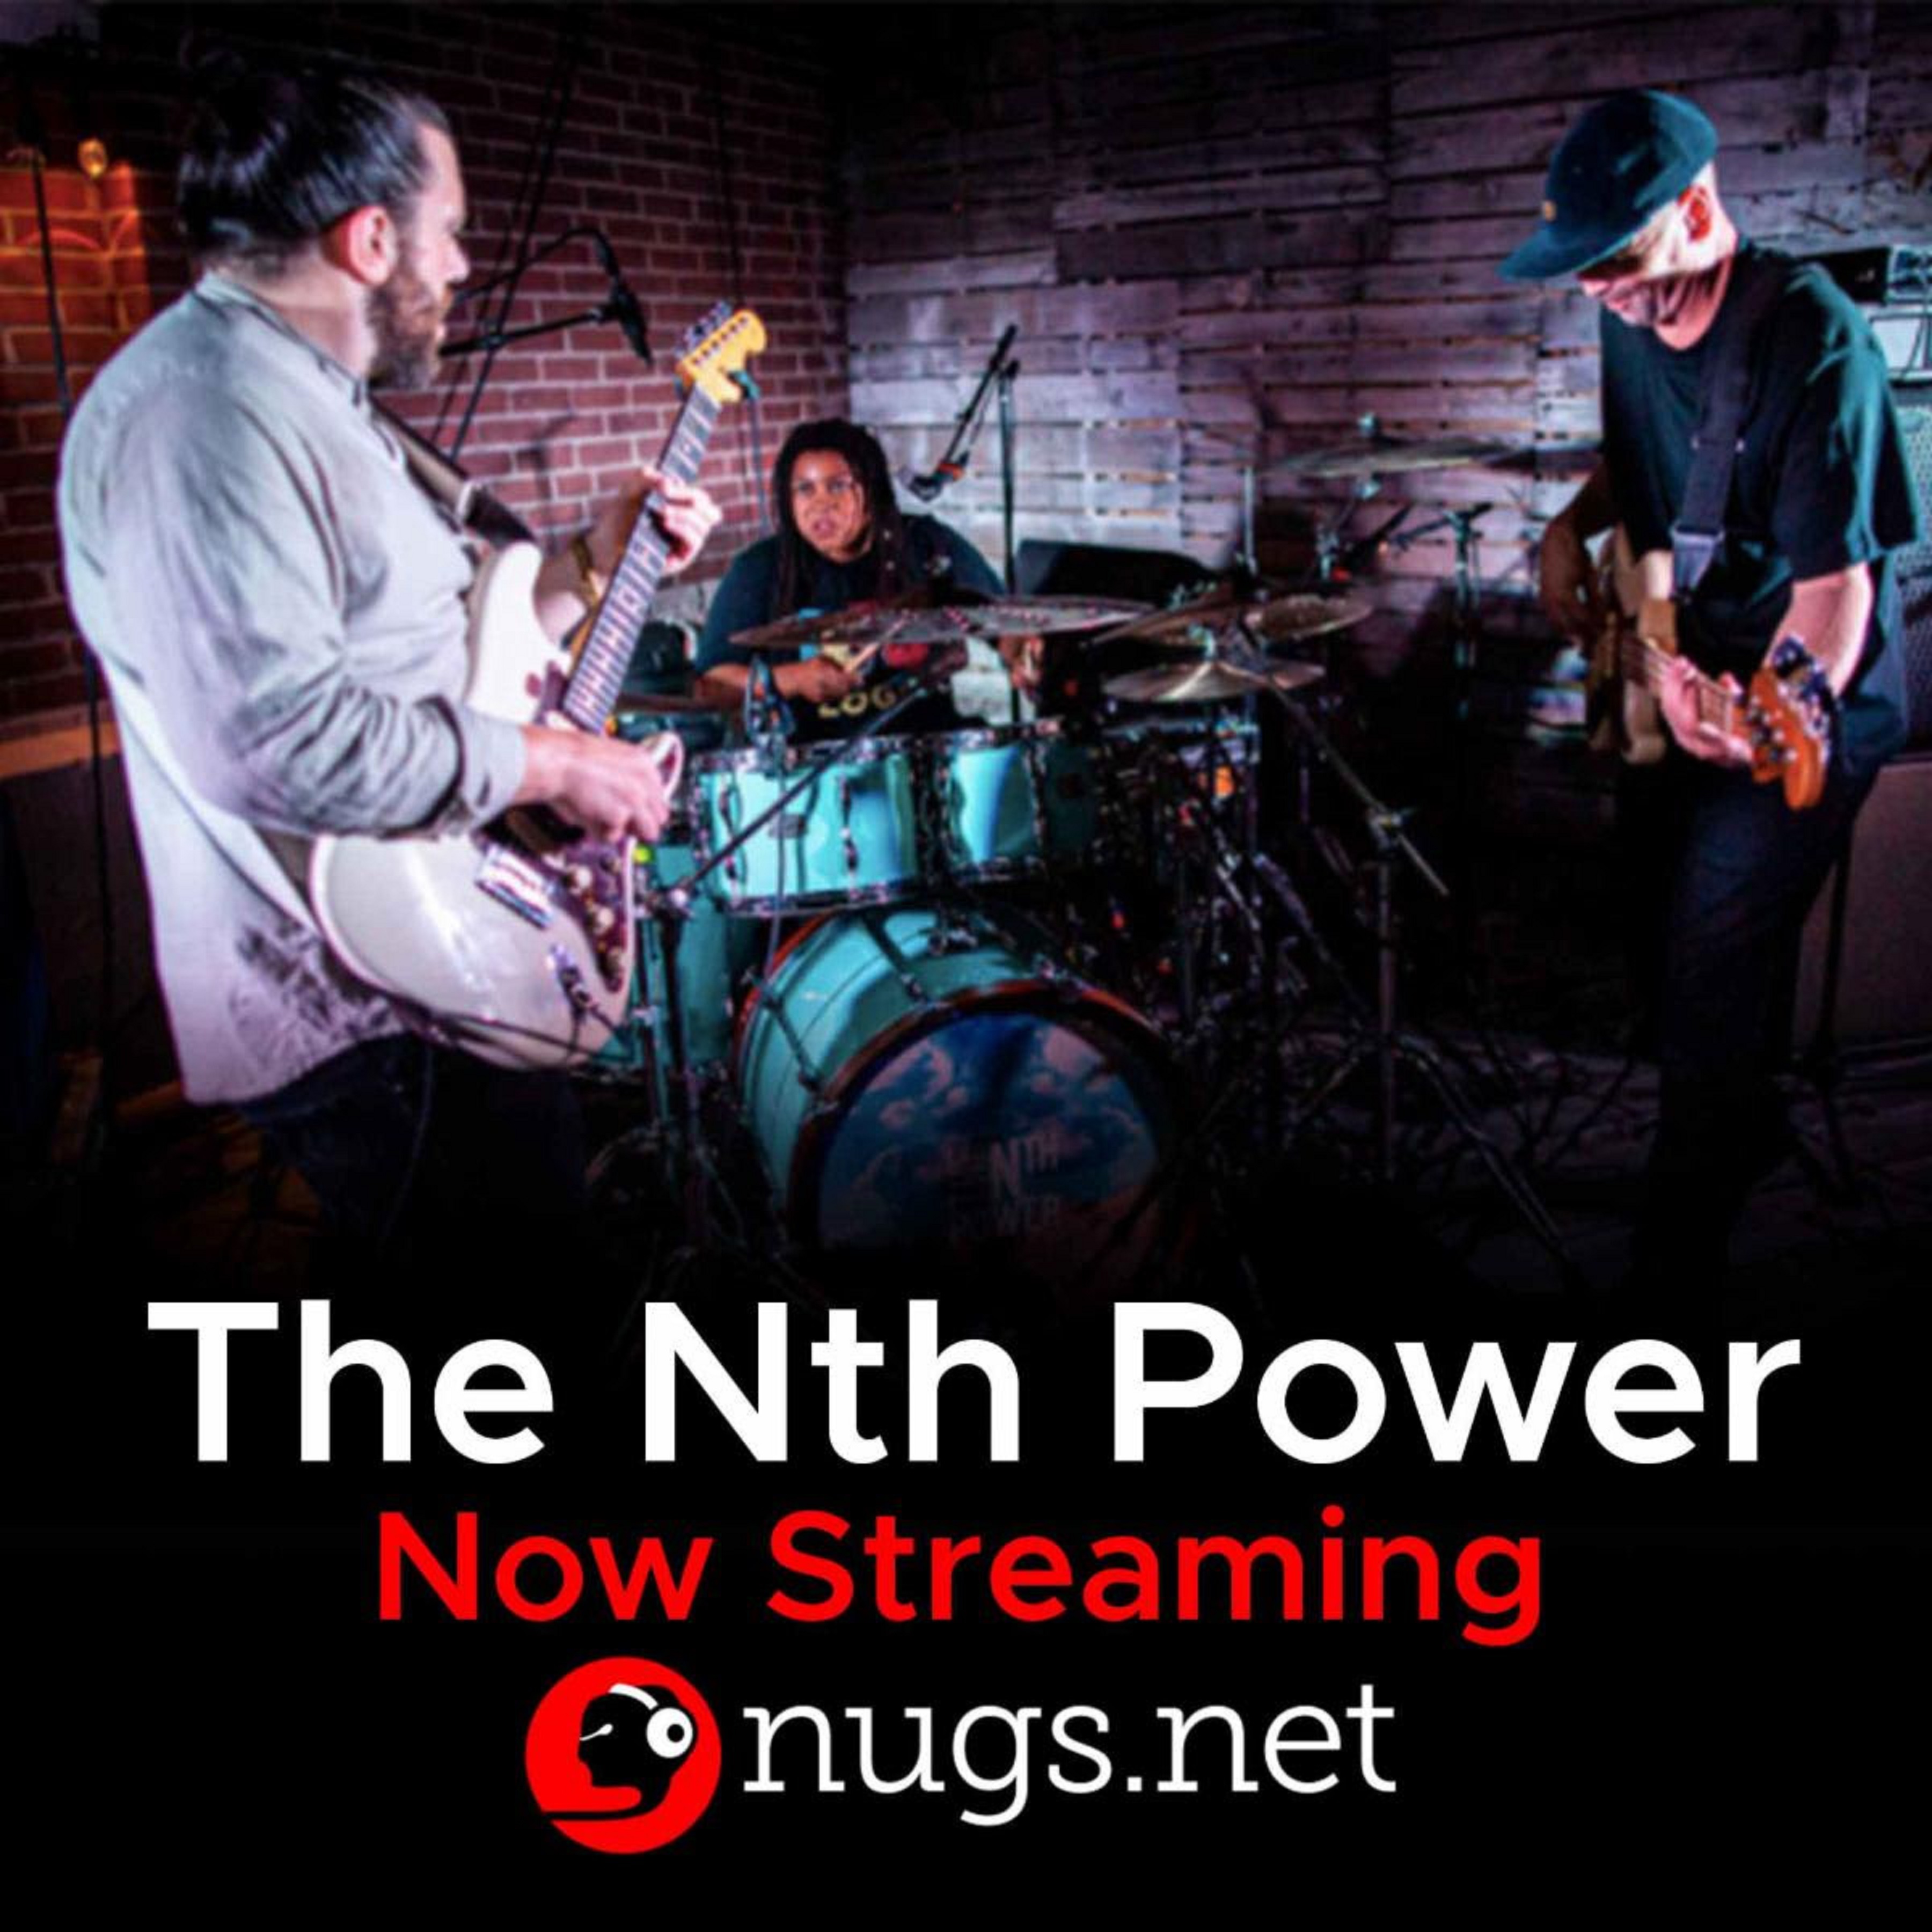 The Nth Power Announces Nugs.net Partnership, Releases Live Archives